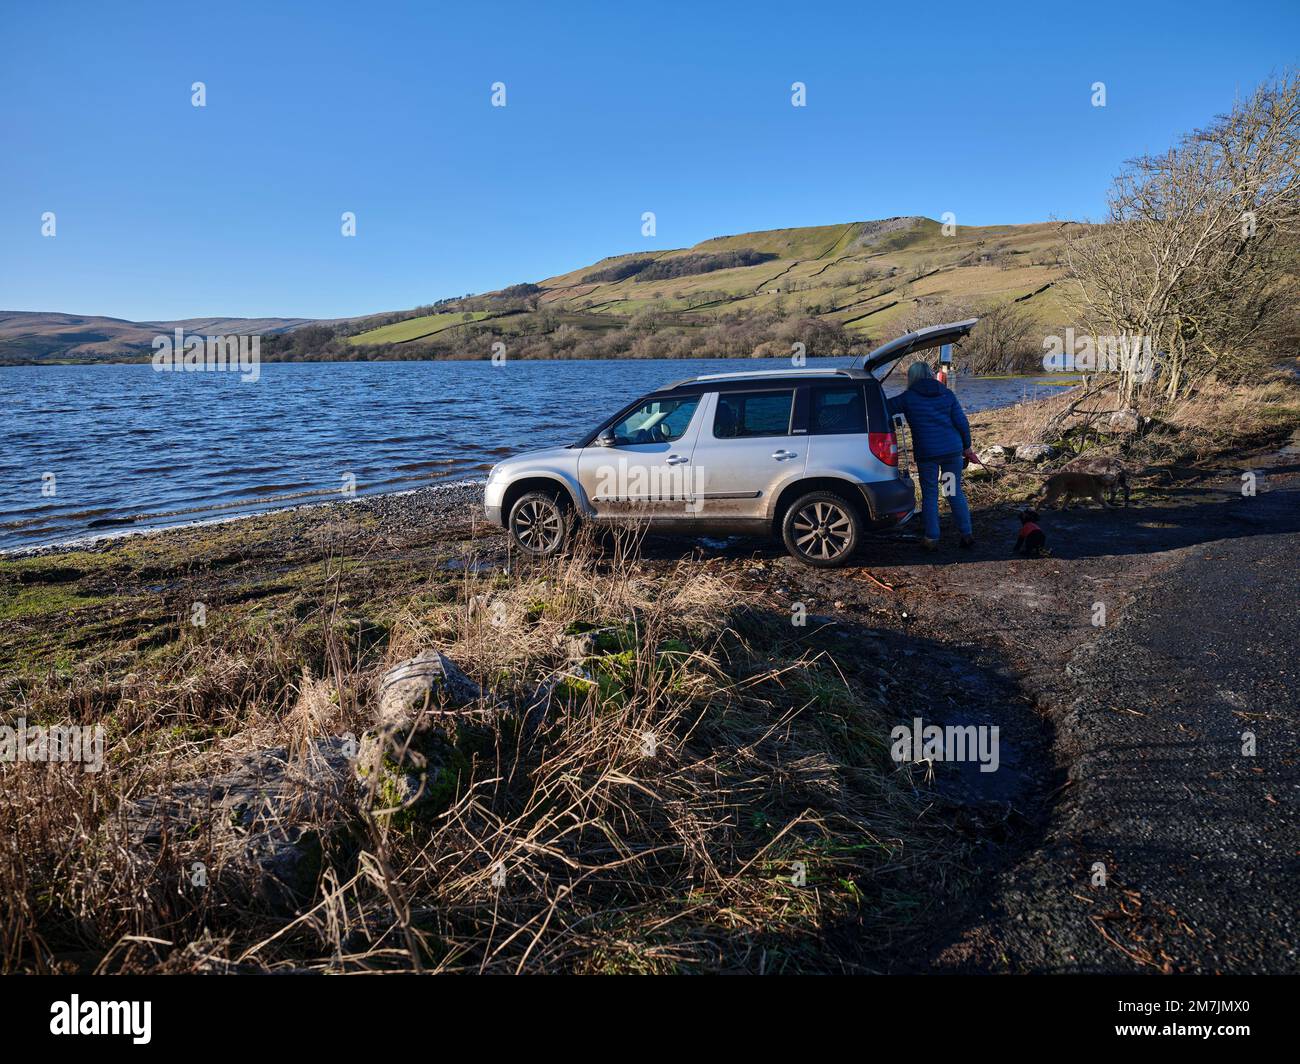 From the northern shore of Semerwater, looking north west towards Green Scar  Mire Crag. Adult female disembarking dogs from Skoda Yeti. Raydale Stock  Photo - Alamy